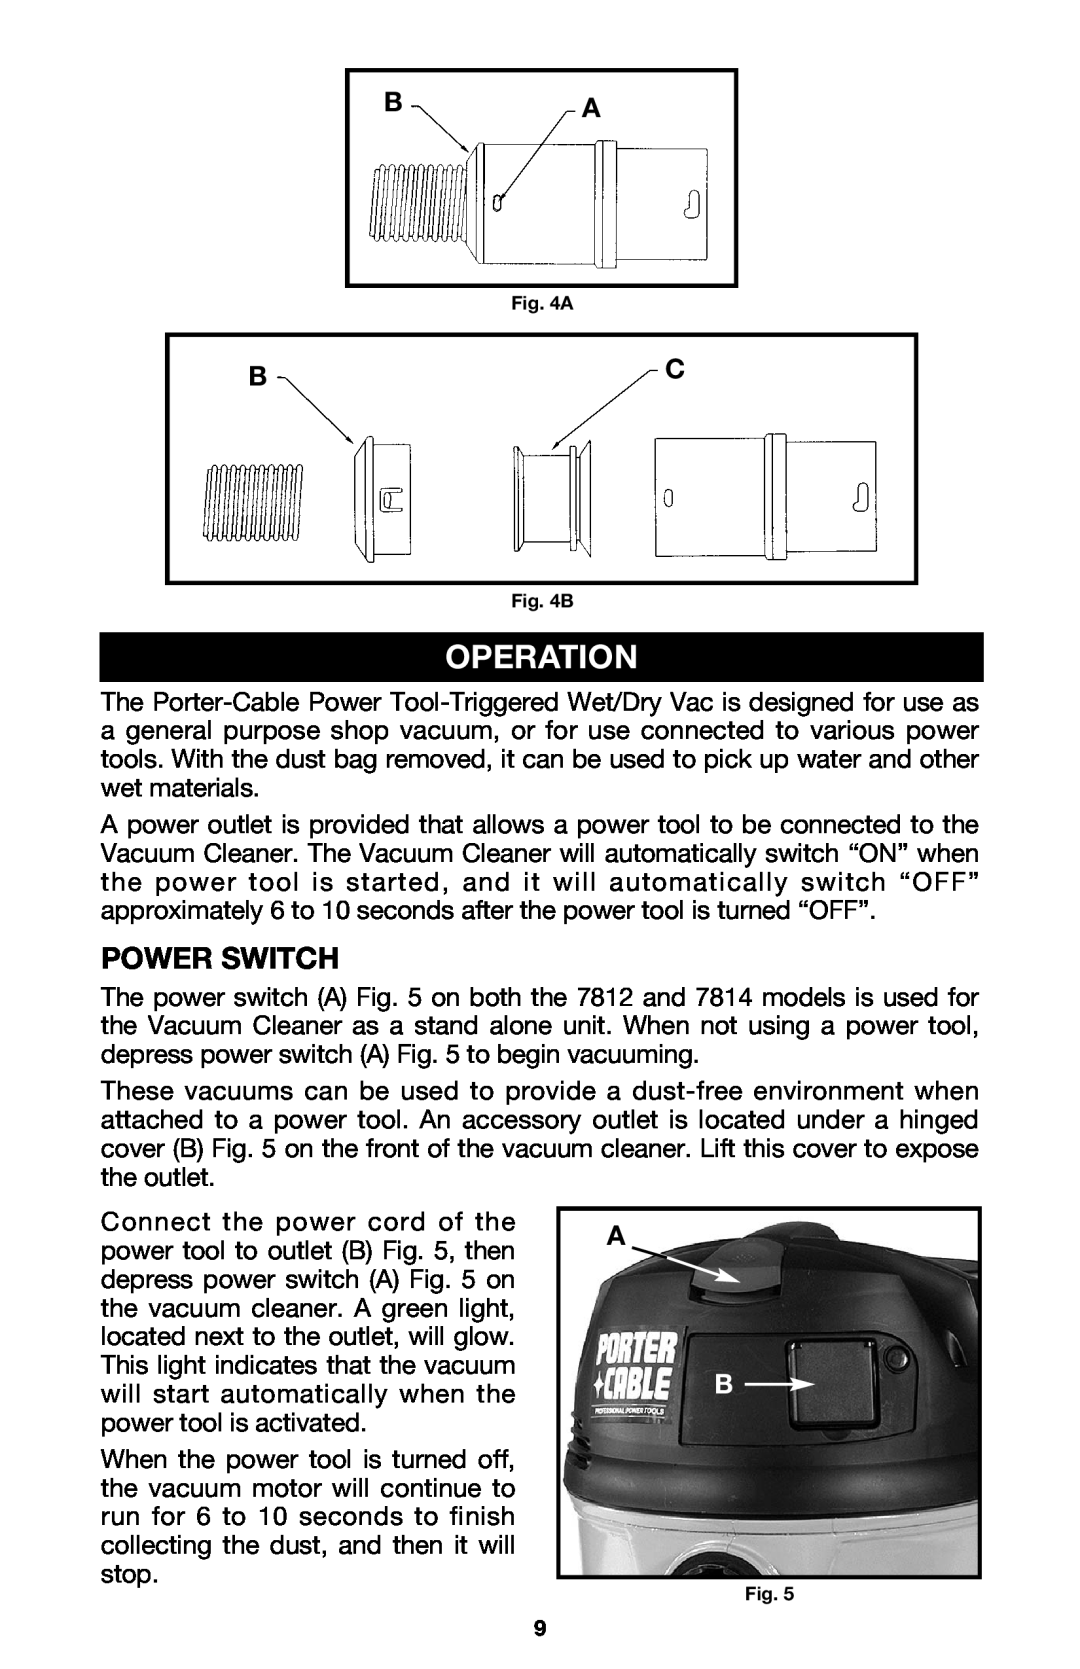 Porter-Cable 7814 instruction manual Operation, Power Switch 